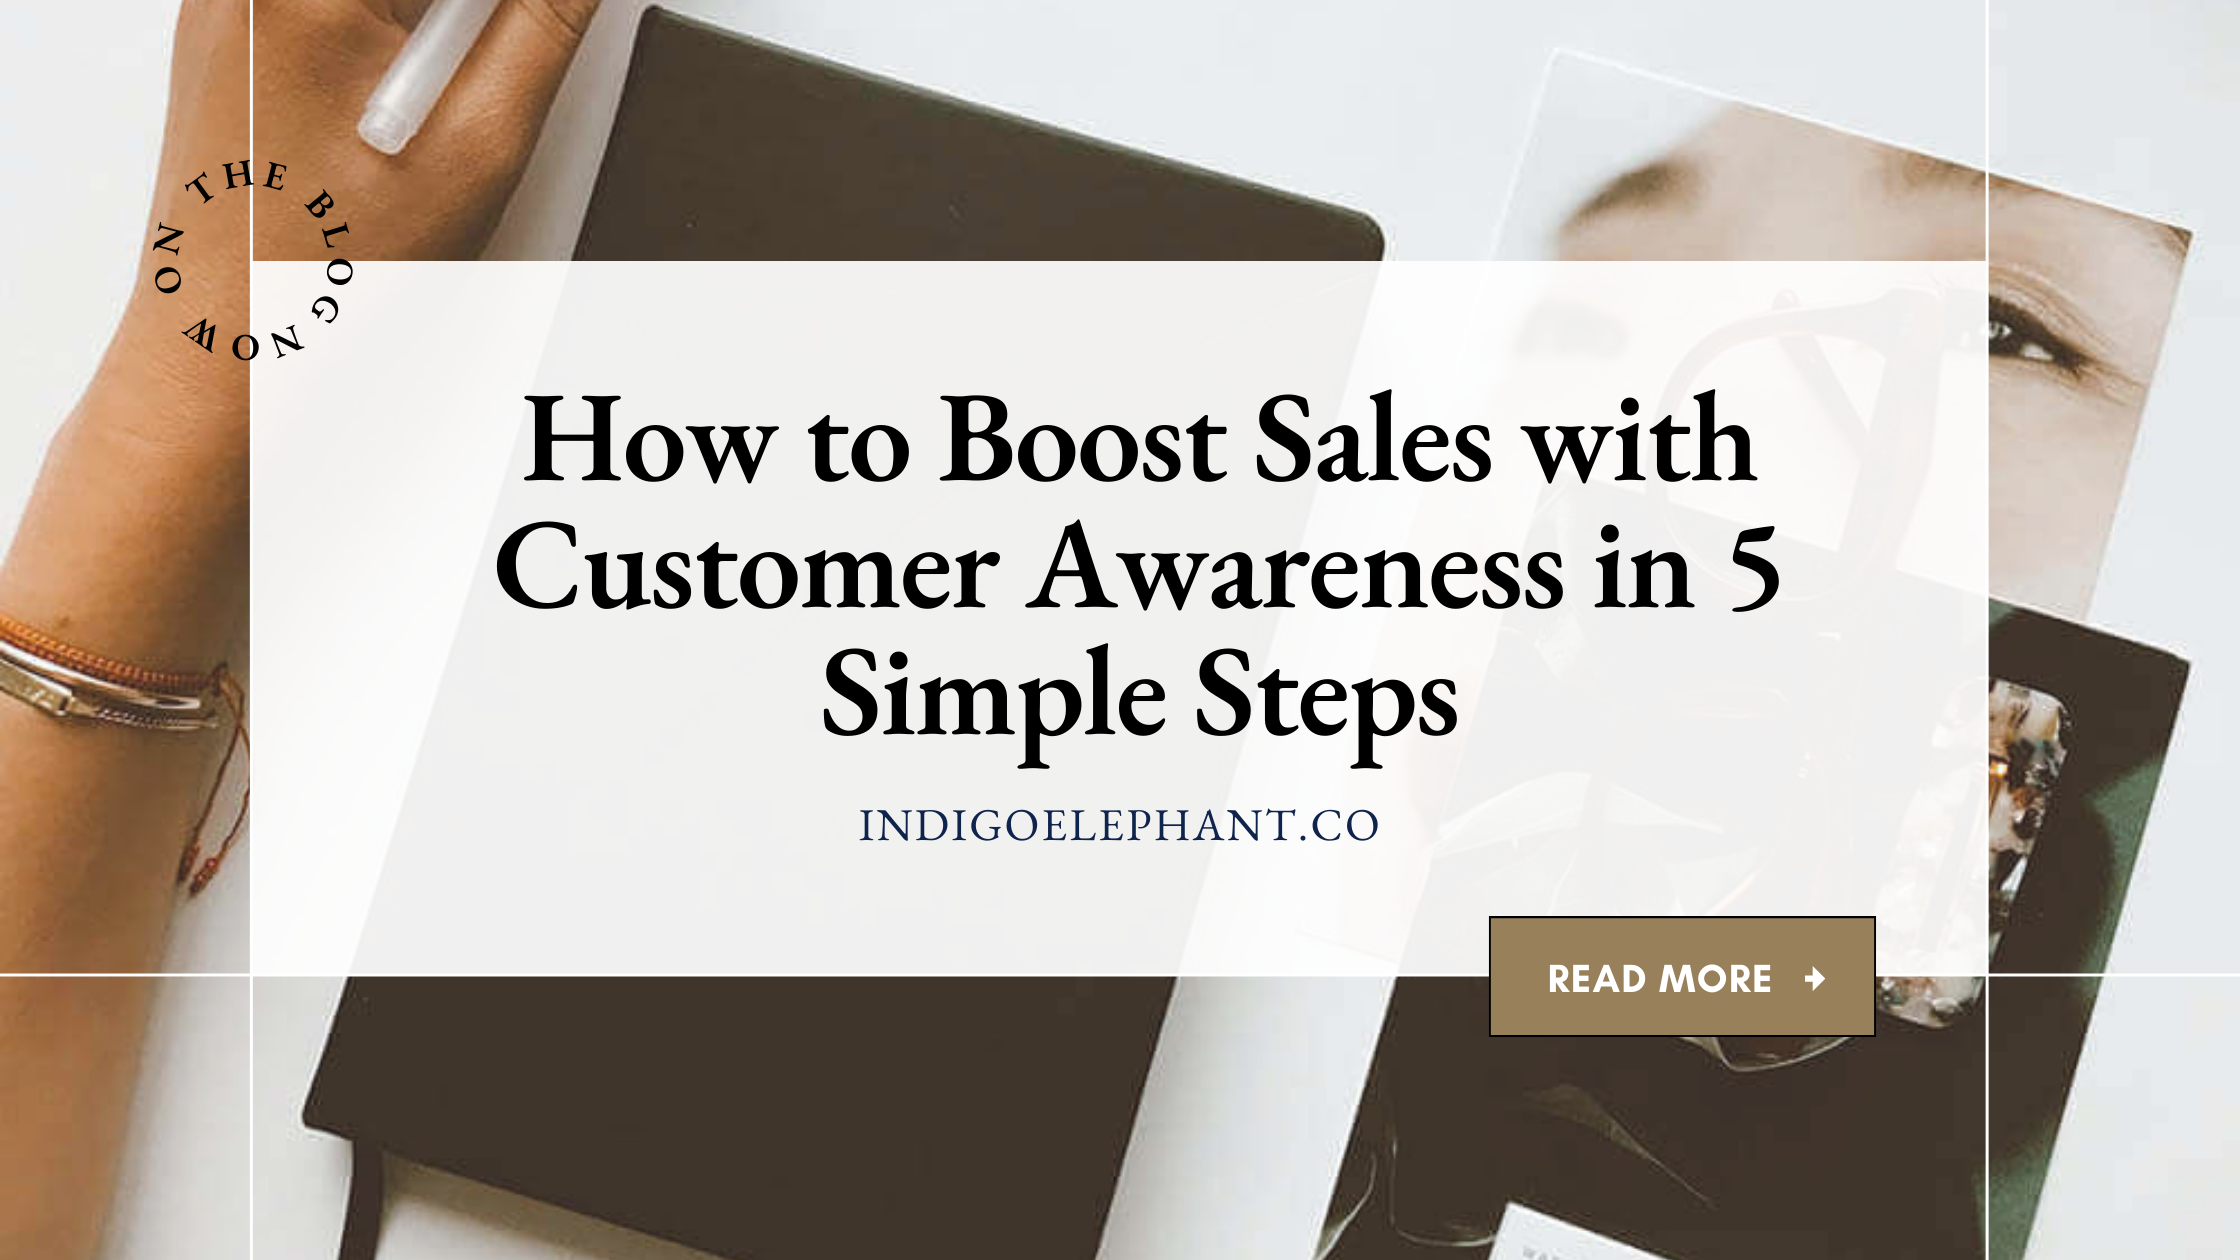 How to Boost Sales with Customer Awareness in 5 Simple Steps